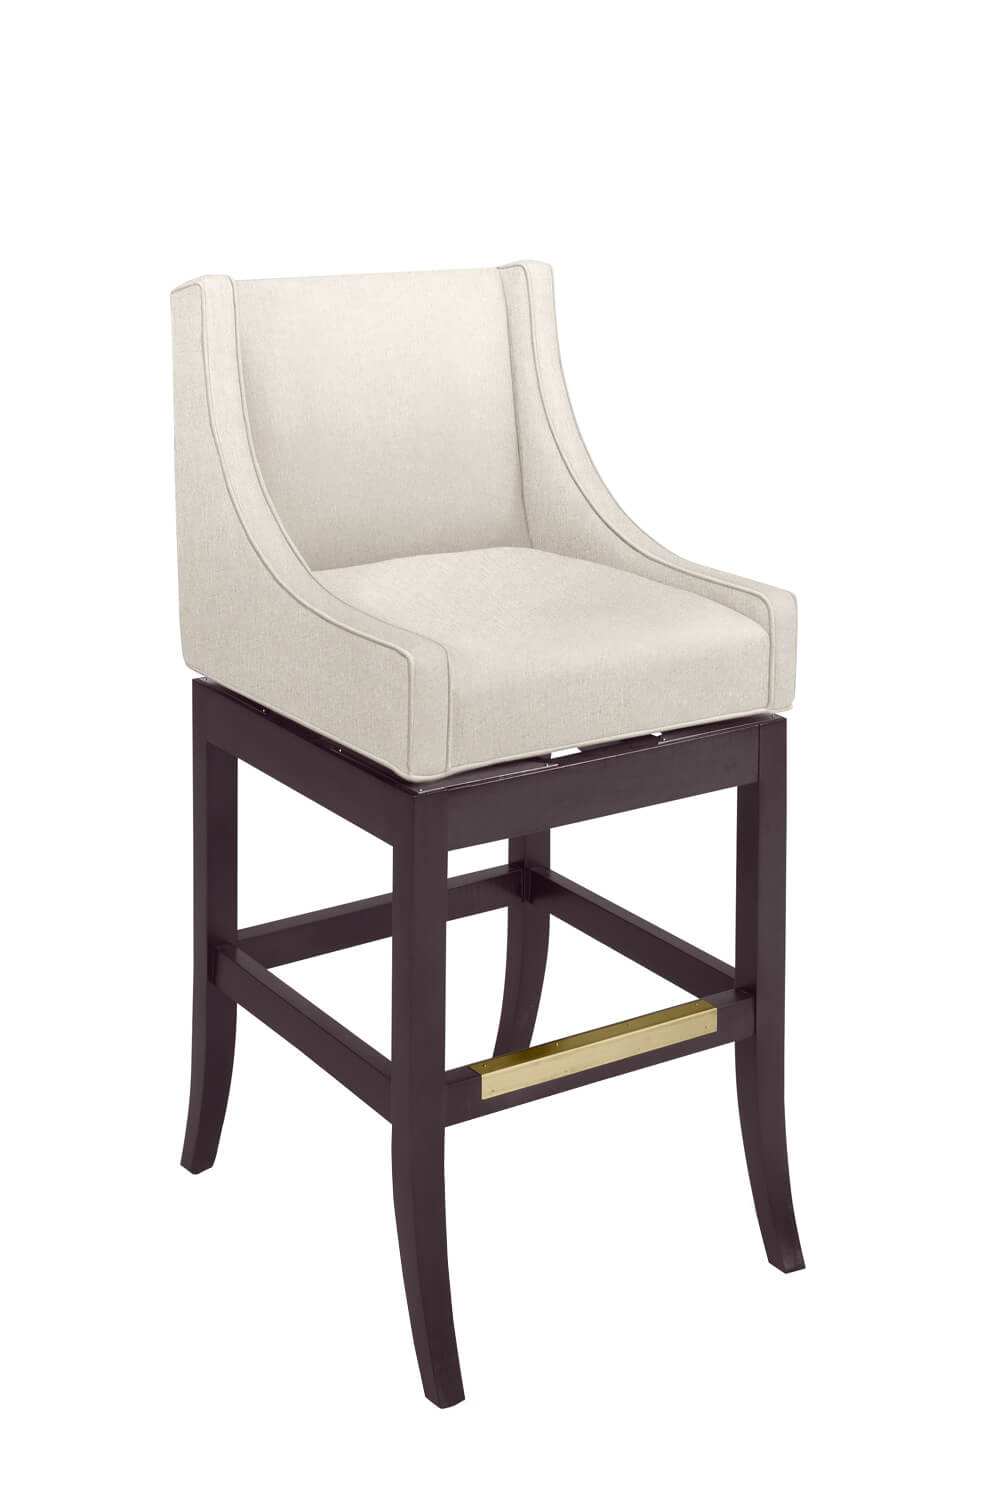 Style Upholstering 101 Transitional Wood Bar Stool with Back - No Buttons